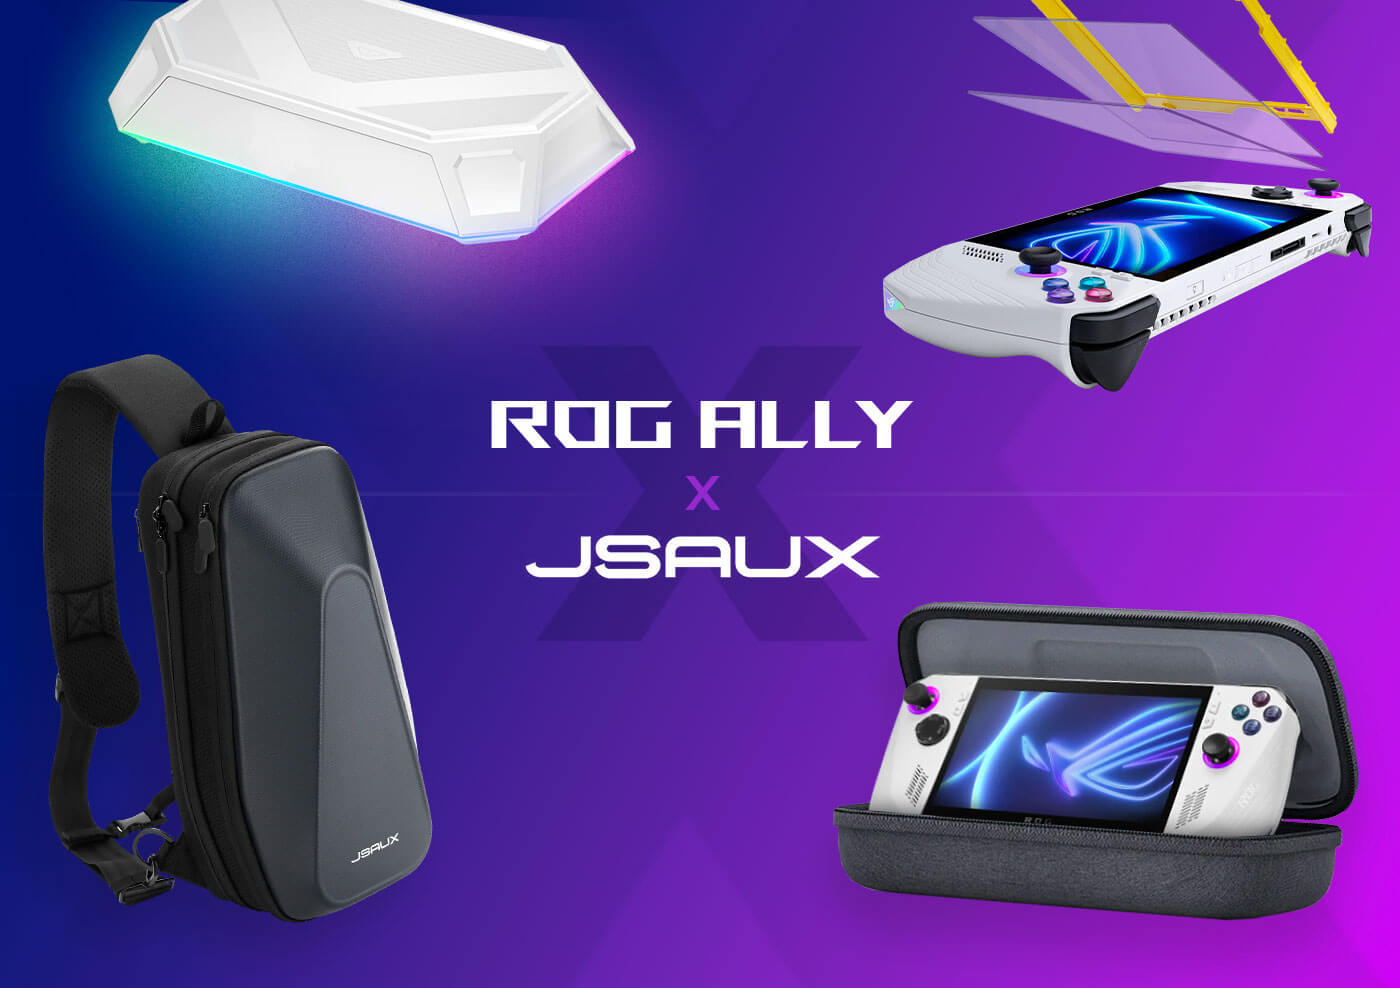 Asus ROG Ally Textured Comfort Grip Case Accessories 3D Printed Multiple  Colors 